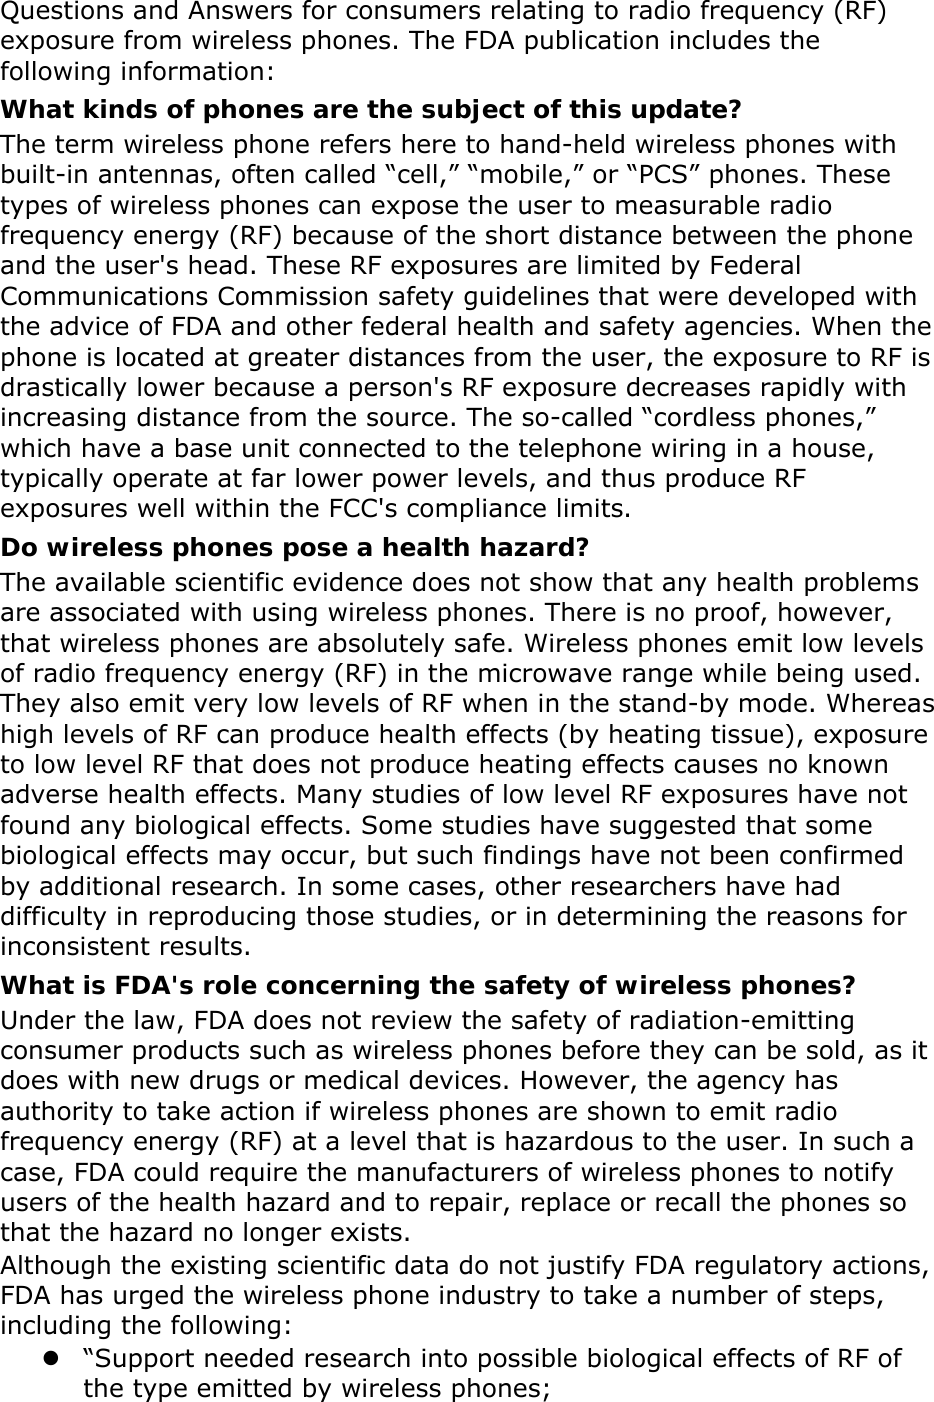   Questions and Answers for consumers relating to radio frequency (RF) exposure from wireless phones. The FDA publication includes the following information: What kinds of phones are the subject of this update? The term wireless phone refers here to hand-held wireless phones with built-in antennas, often called “cell,” “mobile,” or “PCS” phones. These types of wireless phones can expose the user to measurable radio frequency energy (RF) because of the short distance between the phone and the user&apos;s head. These RF exposures are limited by Federal Communications Commission safety guidelines that were developed with the advice of FDA and other federal health and safety agencies. When the phone is located at greater distances from the user, the exposure to RF is drastically lower because a person&apos;s RF exposure decreases rapidly with increasing distance from the source. The so-called “cordless phones,” which have a base unit connected to the telephone wiring in a house, typically operate at far lower power levels, and thus produce RF exposures well within the FCC&apos;s compliance limits. Do wireless phones pose a health hazard? The available scientific evidence does not show that any health problems are associated with using wireless phones. There is no proof, however, that wireless phones are absolutely safe. Wireless phones emit low levels of radio frequency energy (RF) in the microwave range while being used. They also emit very low levels of RF when in the stand-by mode. Whereas high levels of RF can produce health effects (by heating tissue), exposure to low level RF that does not produce heating effects causes no known adverse health effects. Many studies of low level RF exposures have not found any biological effects. Some studies have suggested that some biological effects may occur, but such findings have not been confirmed by additional research. In some cases, other researchers have had difficulty in reproducing those studies, or in determining the reasons for inconsistent results. What is FDA&apos;s role concerning the safety of wireless phones? Under the law, FDA does not review the safety of radiation-emitting consumer products such as wireless phones before they can be sold, as it does with new drugs or medical devices. However, the agency has authority to take action if wireless phones are shown to emit radio frequency energy (RF) at a level that is hazardous to the user. In such a case, FDA could require the manufacturers of wireless phones to notify users of the health hazard and to repair, replace or recall the phones so that the hazard no longer exists. Although the existing scientific data do not justify FDA regulatory actions, FDA has urged the wireless phone industry to take a number of steps, including the following:  “Support needed research into possible biological effects of RF of the type emitted by wireless phones; 